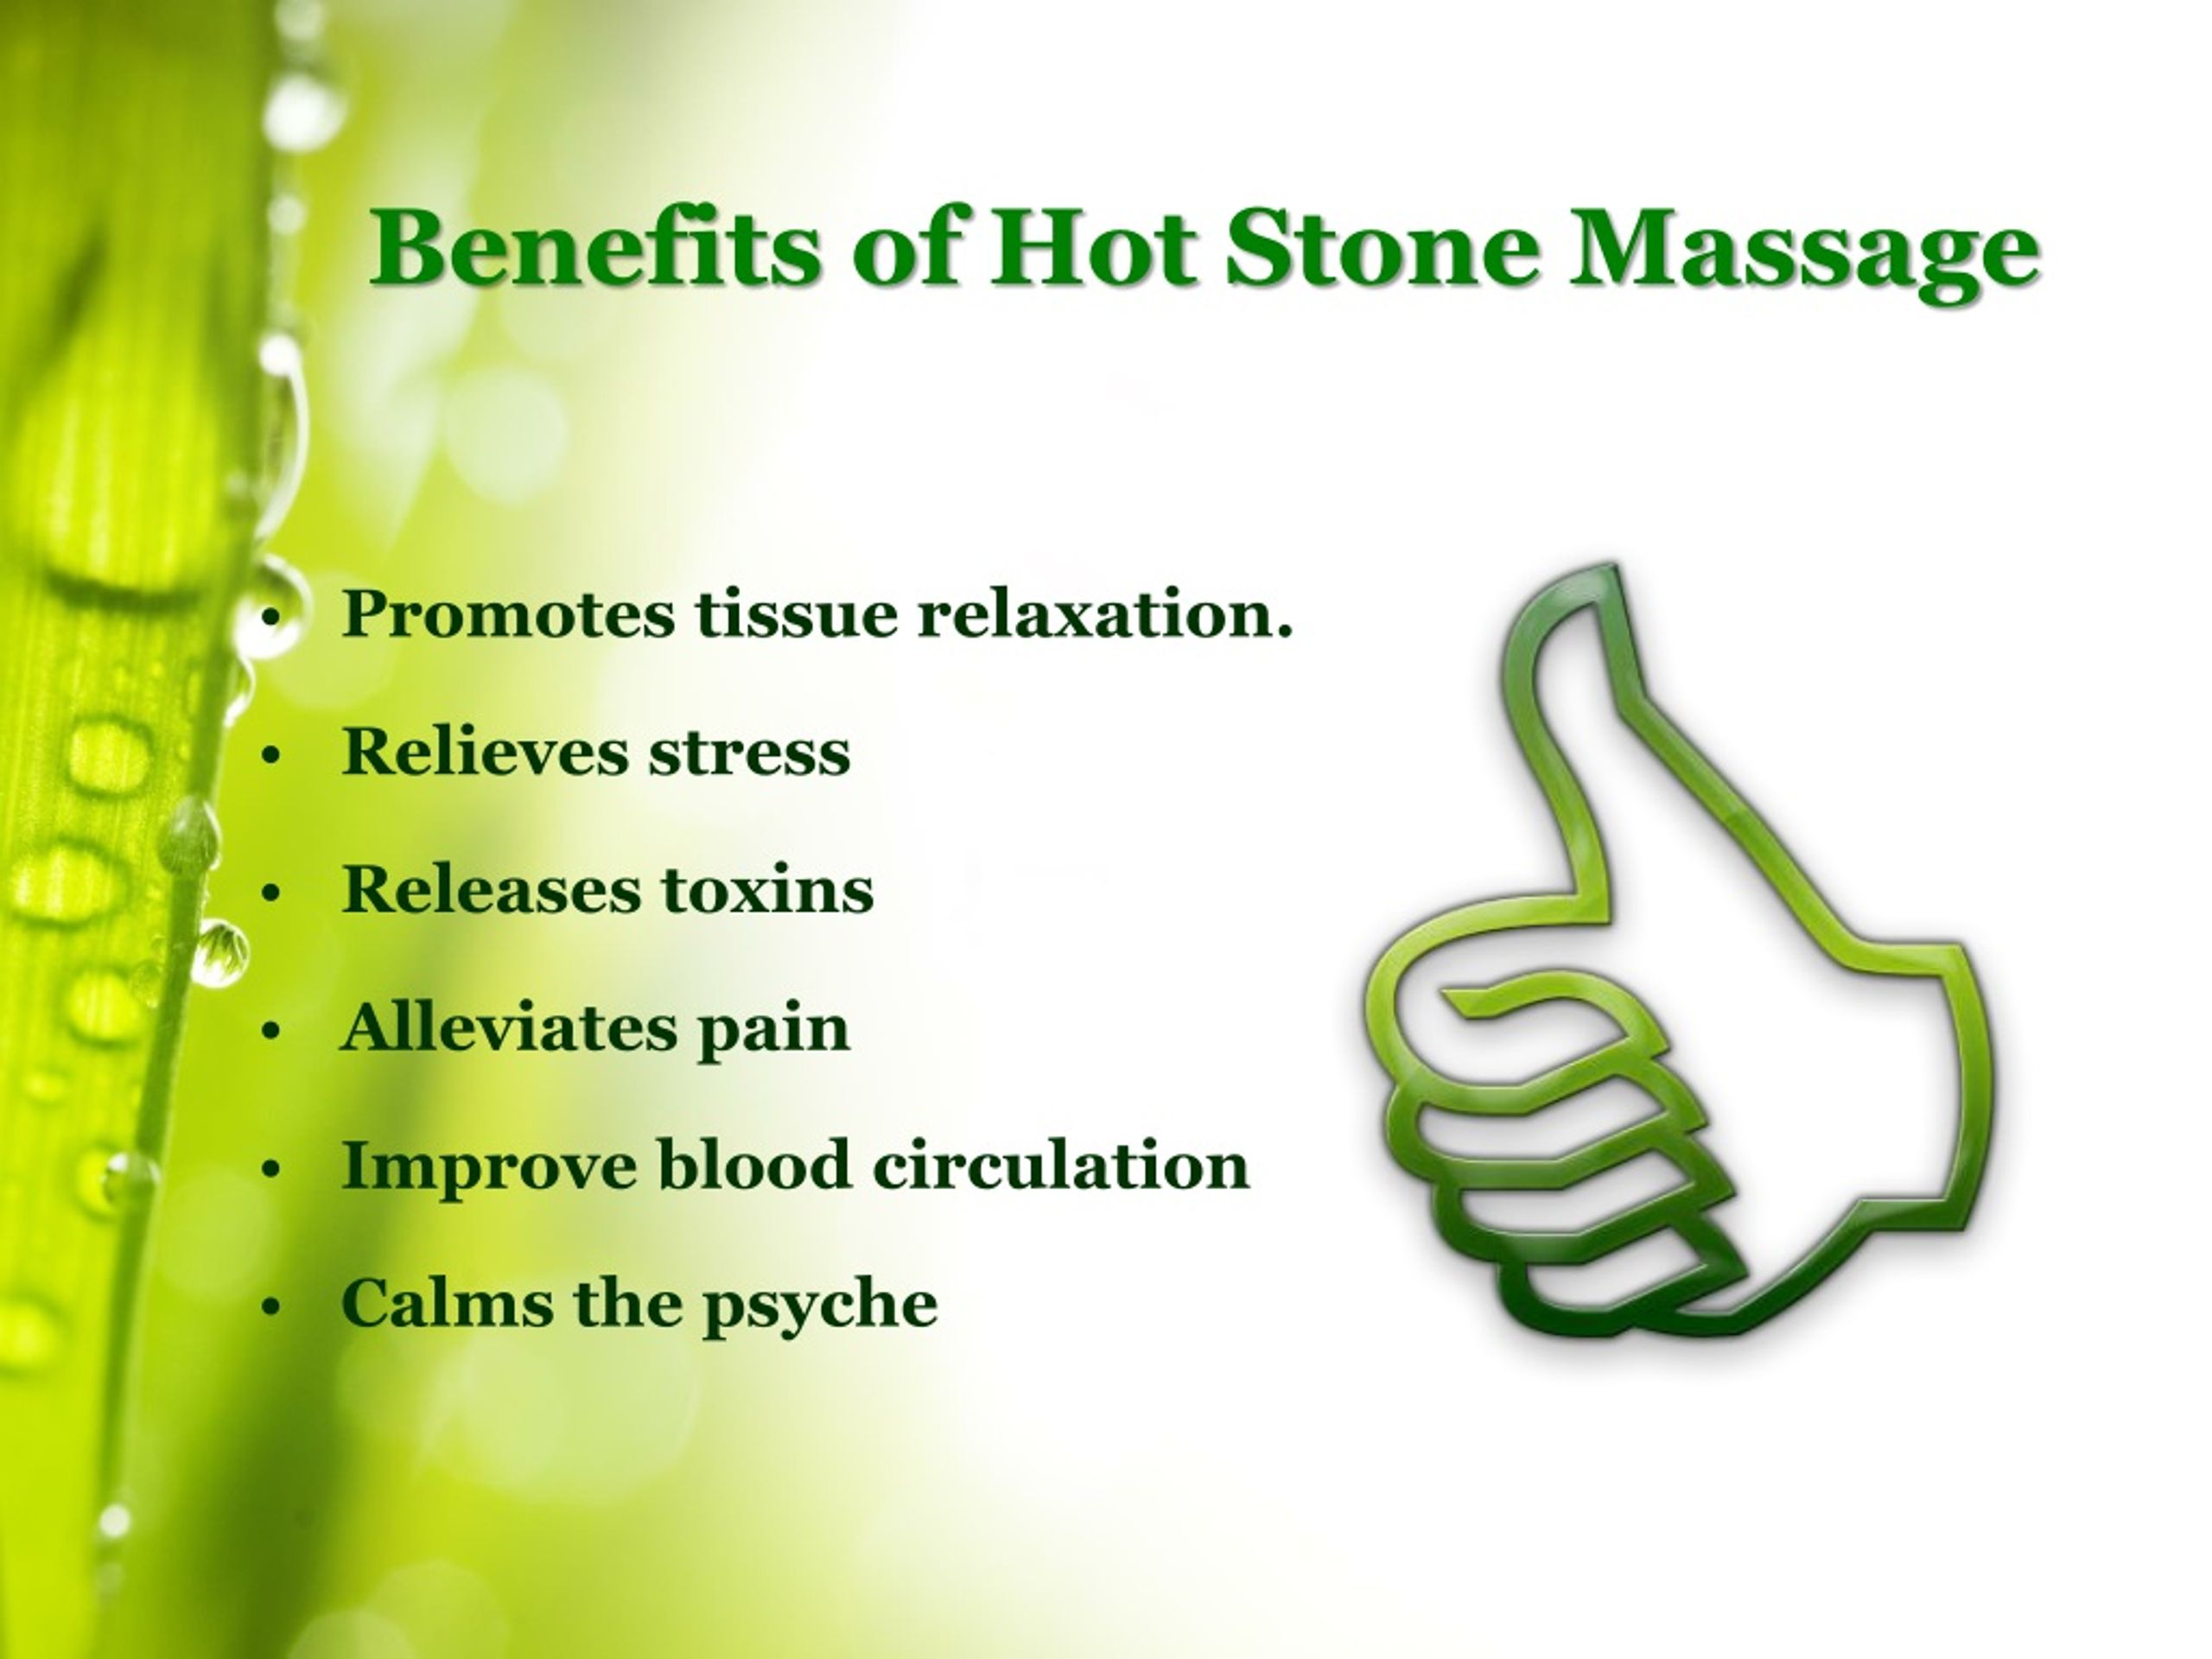 Ppt Get Hot Stone Massage In Brisbane To Relieve Your Stress Powerpoint Presentation Id1386678